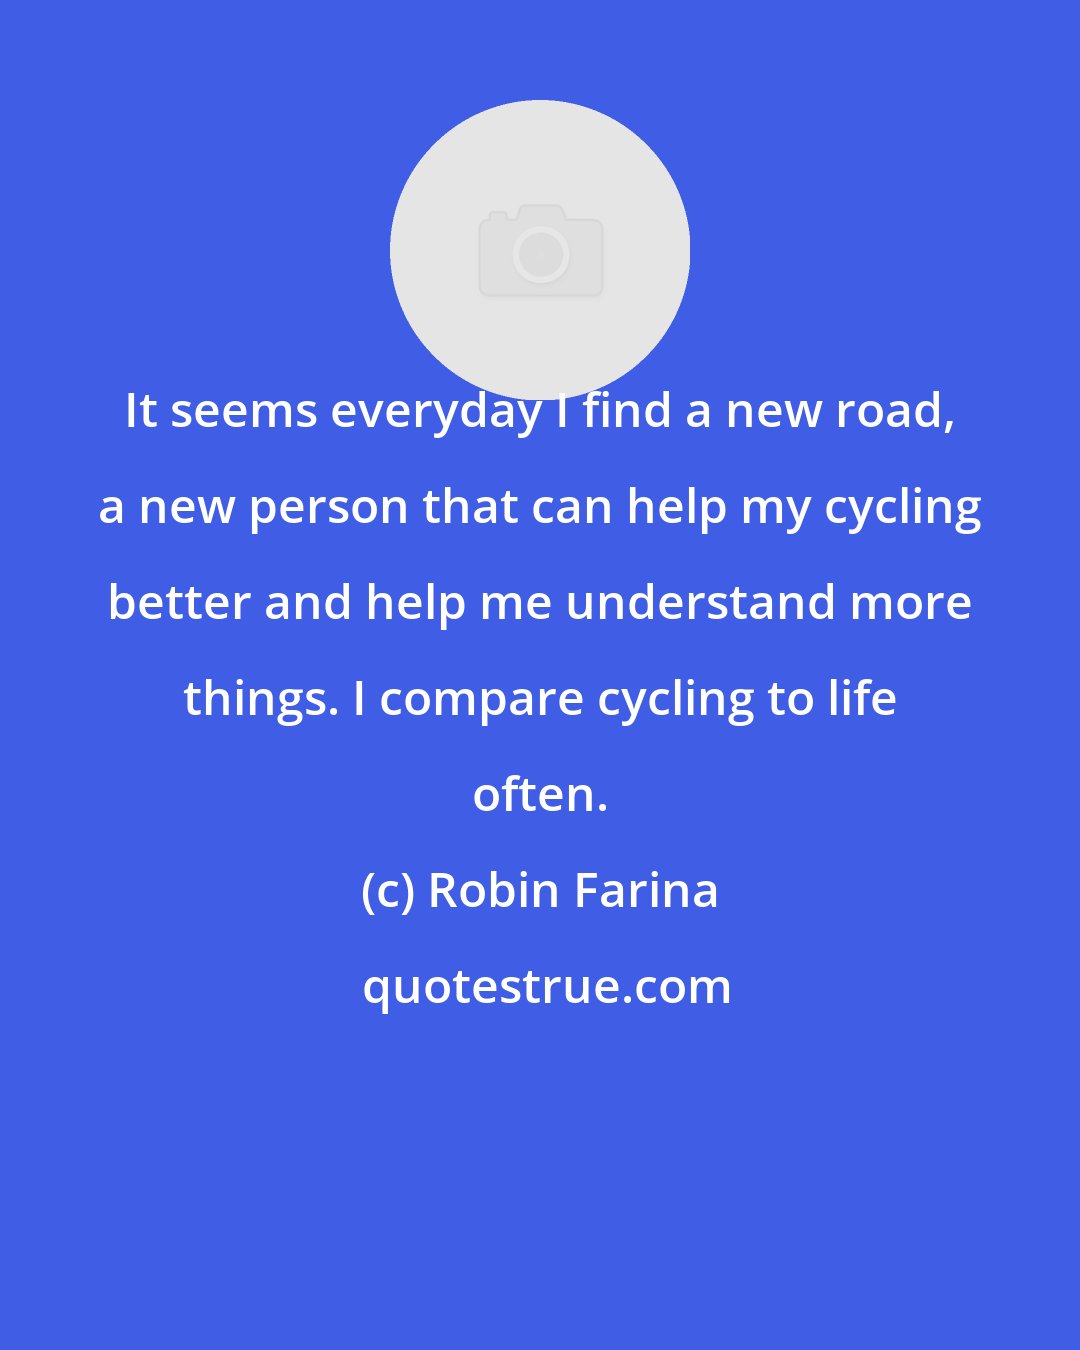 Robin Farina: It seems everyday I find a new road, a new person that can help my cycling better and help me understand more things. I compare cycling to life often.